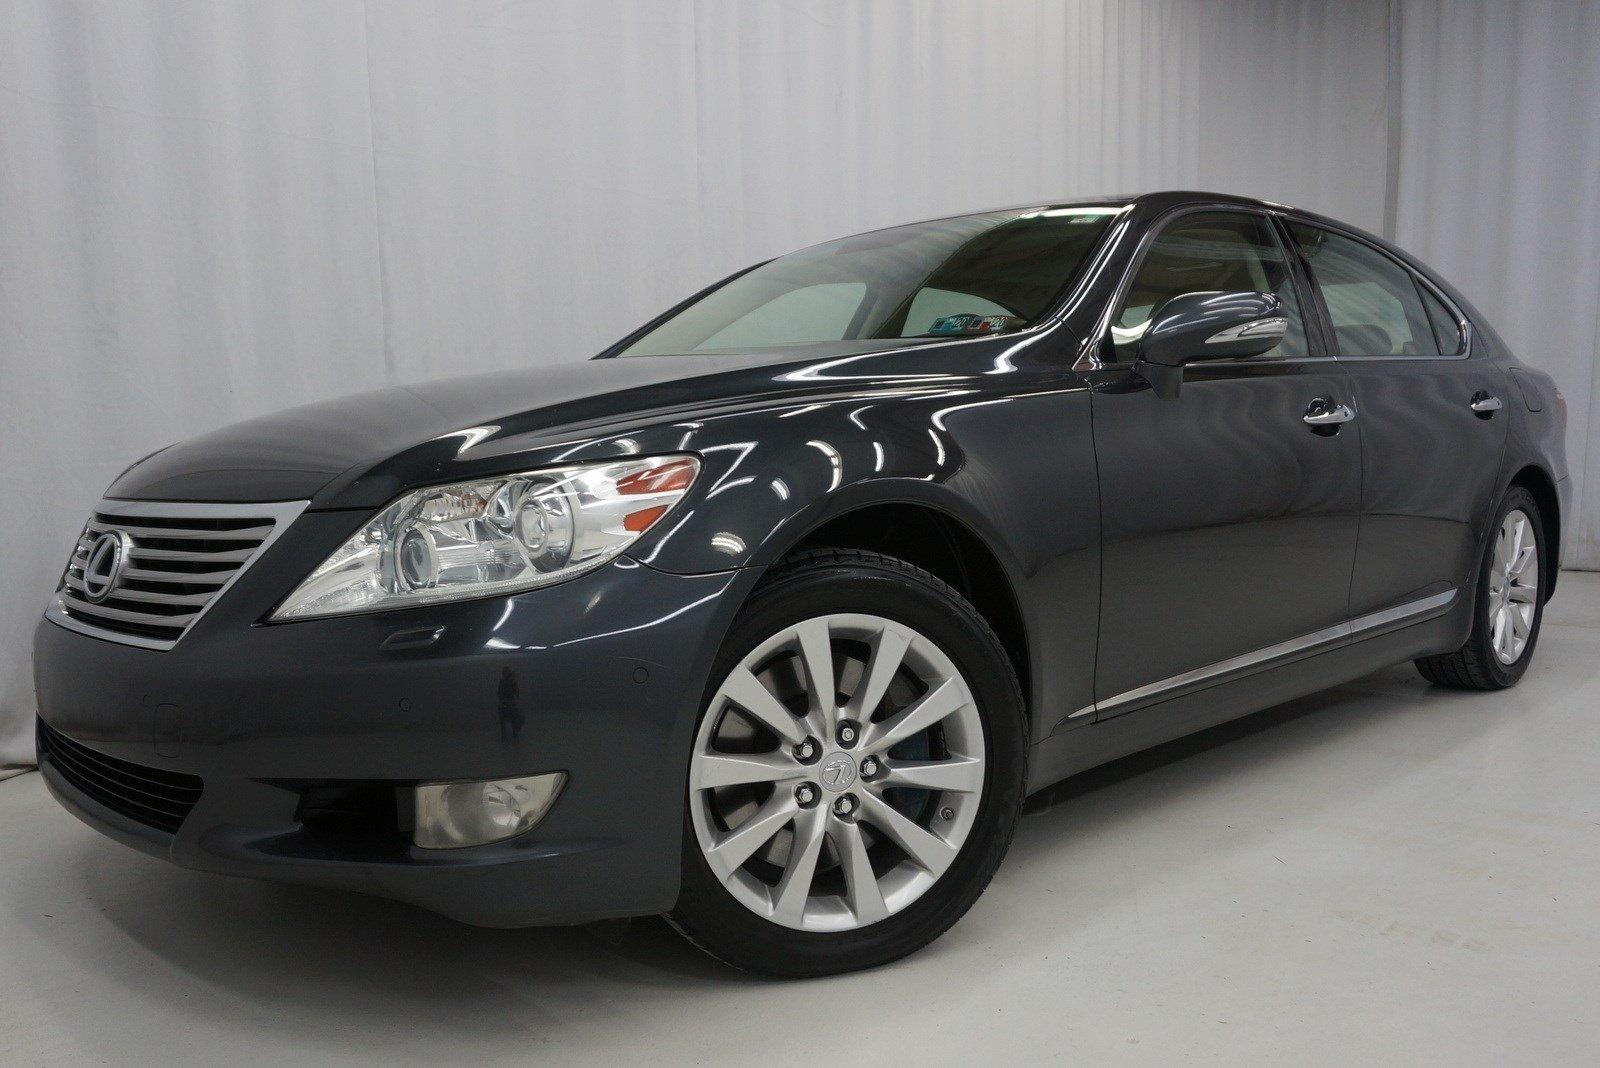 2010 Lexus LS 460 L Stock # 5001814 for sale near King of Prussia, PA ...